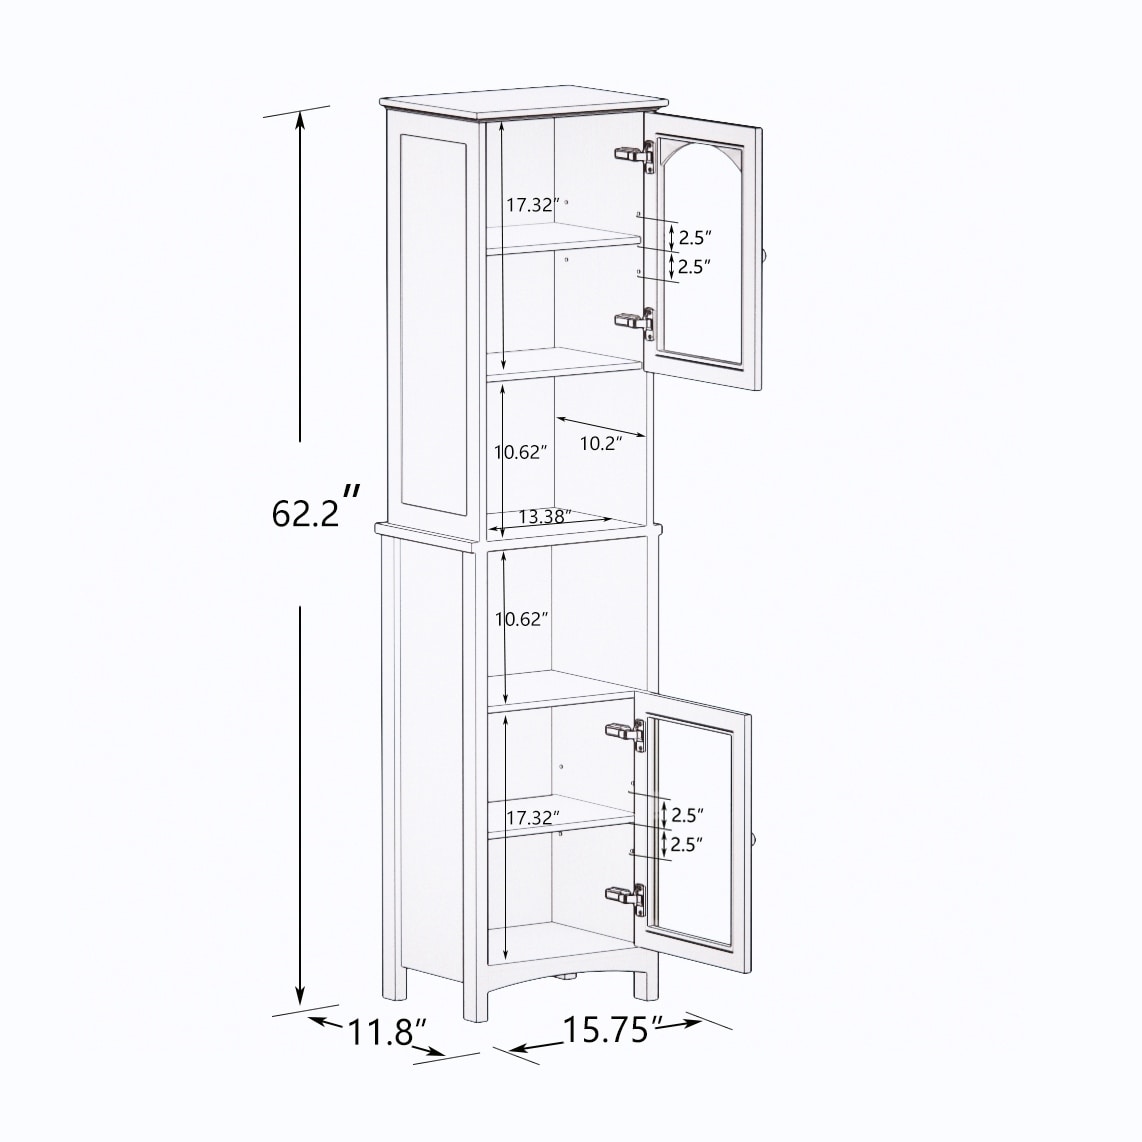 https://ak1.ostkcdn.com/images/products/is/images/direct/d3ec8dab36316ec3d95a434e9b5066980ed04ebc/Narrow-Tall-Slim-Floor-Cabinet-with-2-Glass-Doors-and-Adjustable-Shelves.jpg